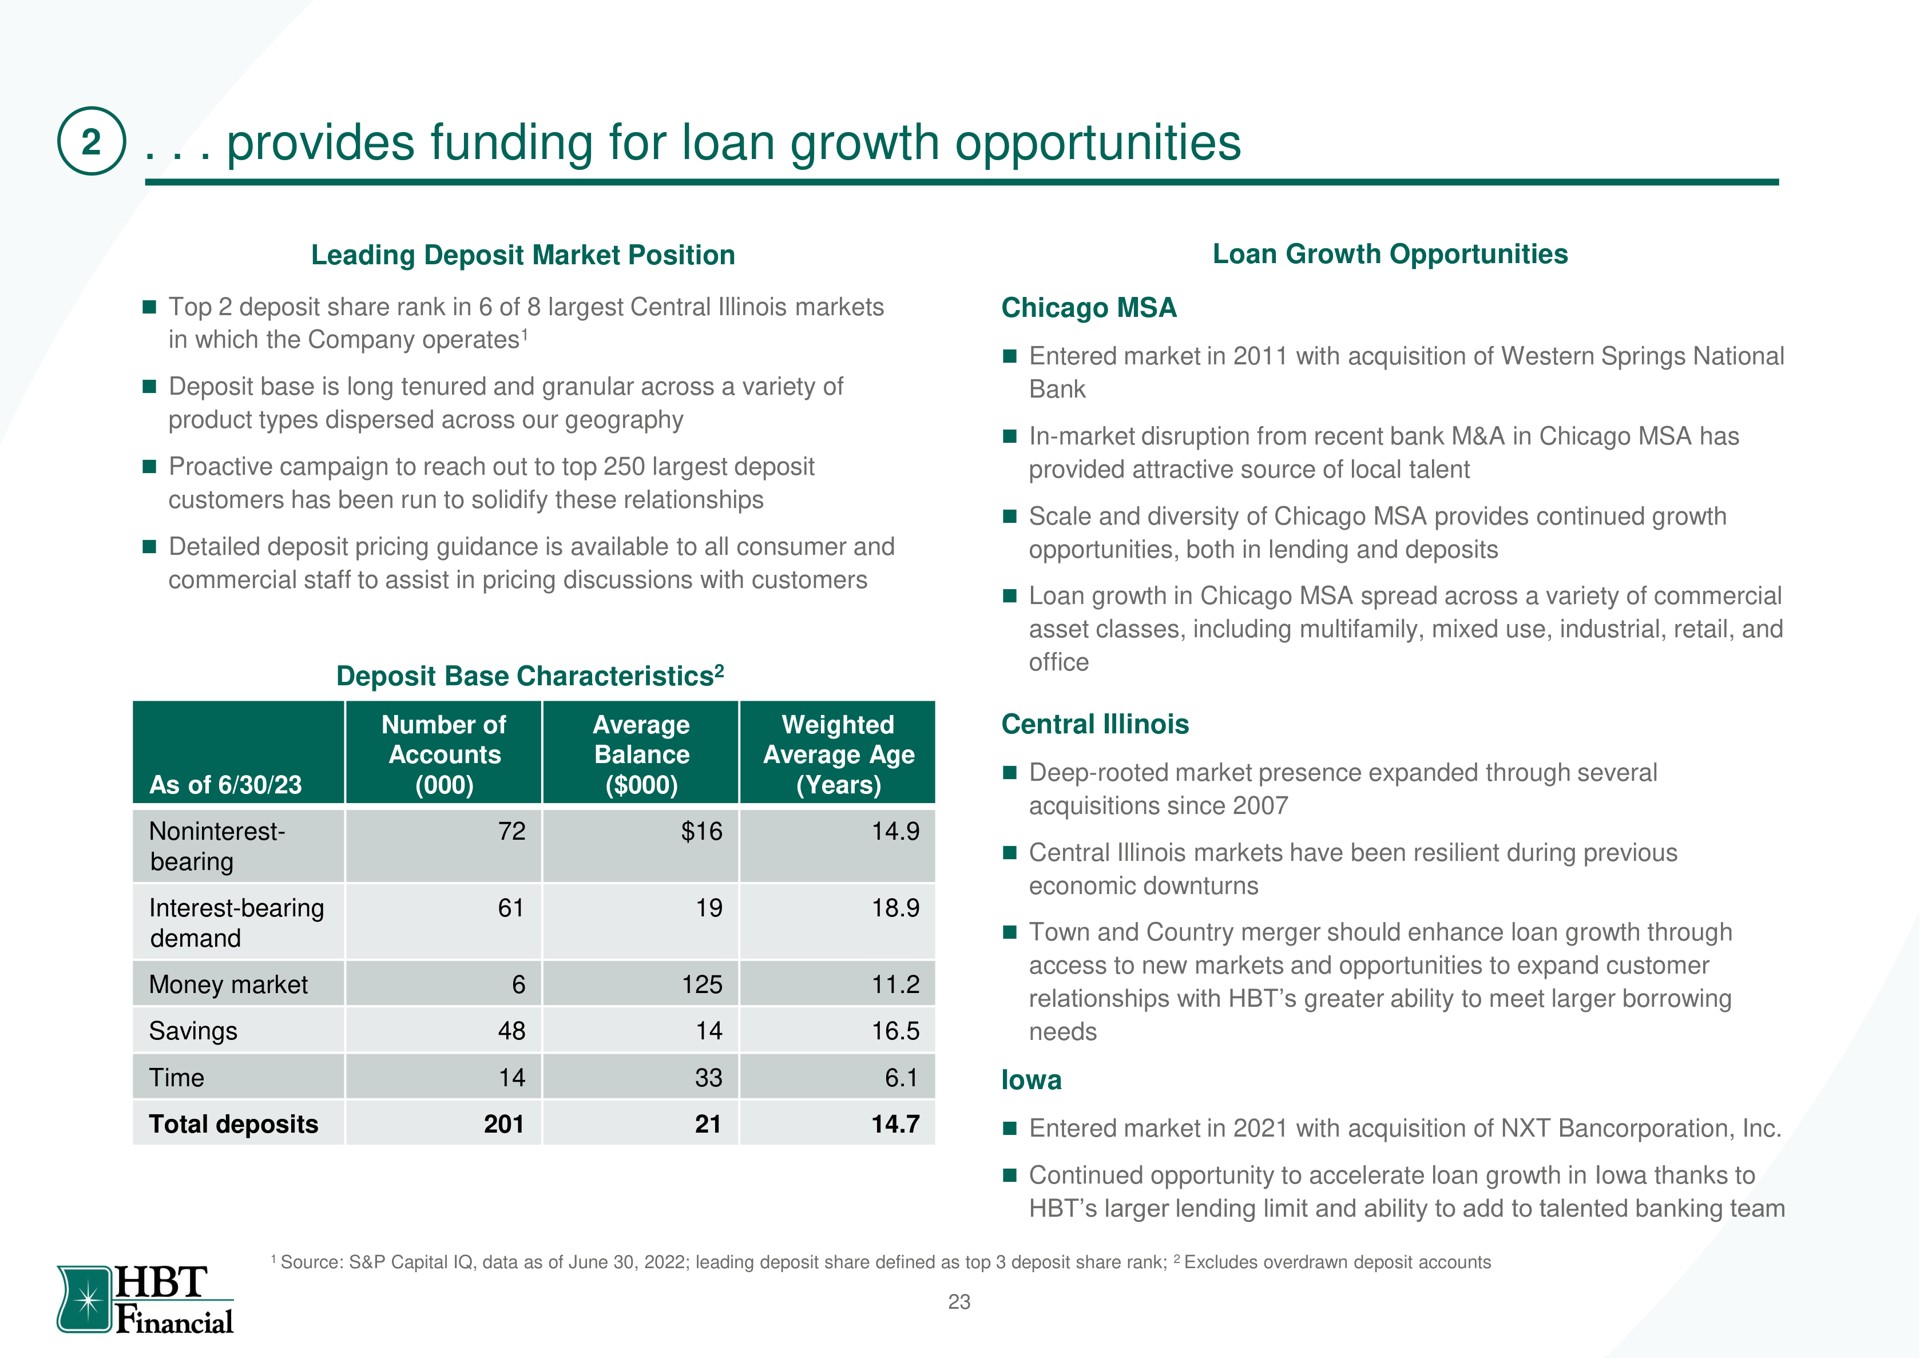 provides funding for loan growth opportunities financial | HBT Financial